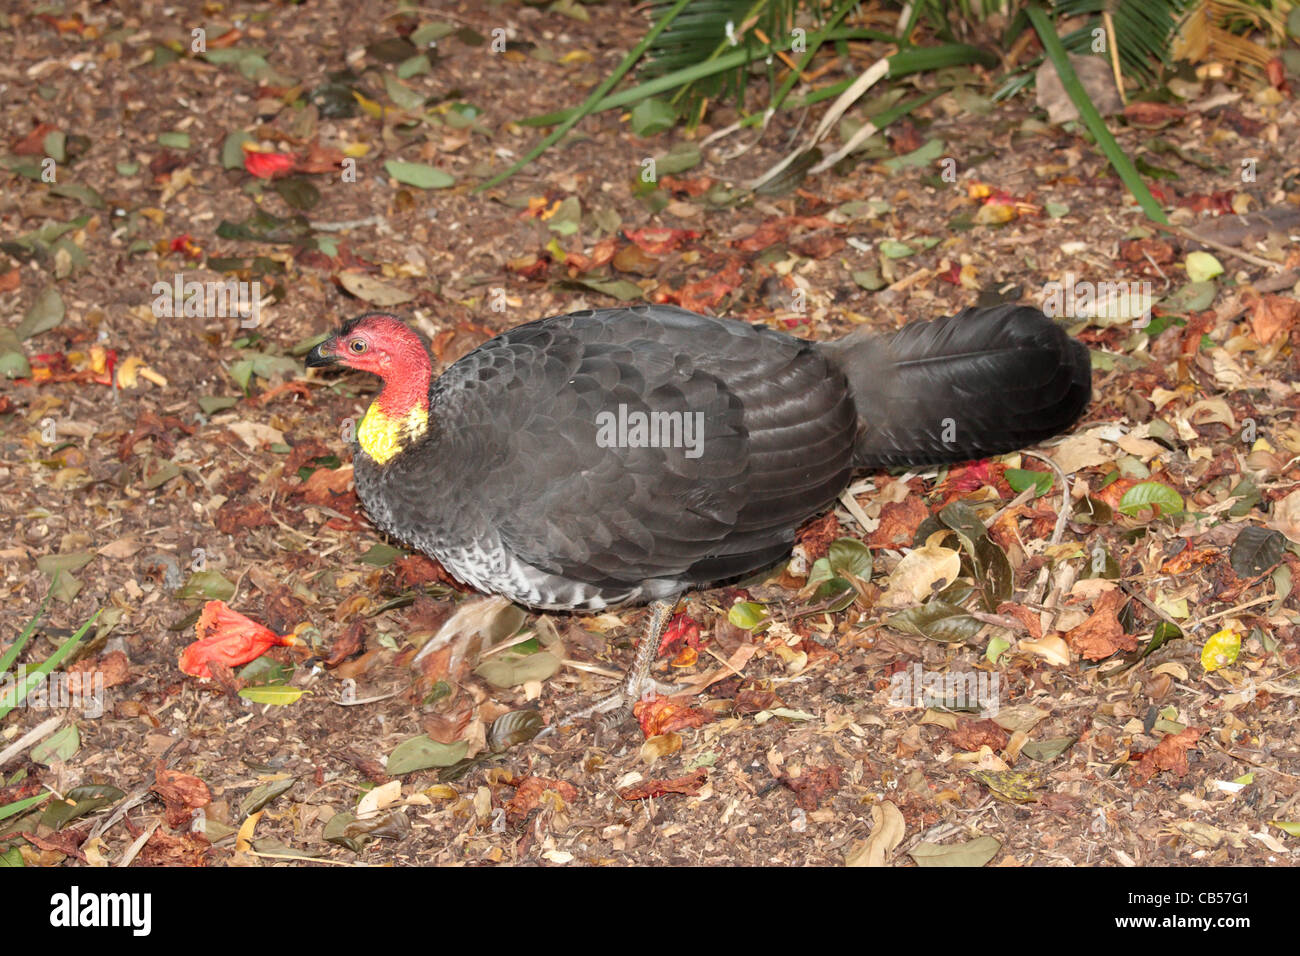 Wild Turkey amongst the Fallen Leaves and Flowers Stock Photo